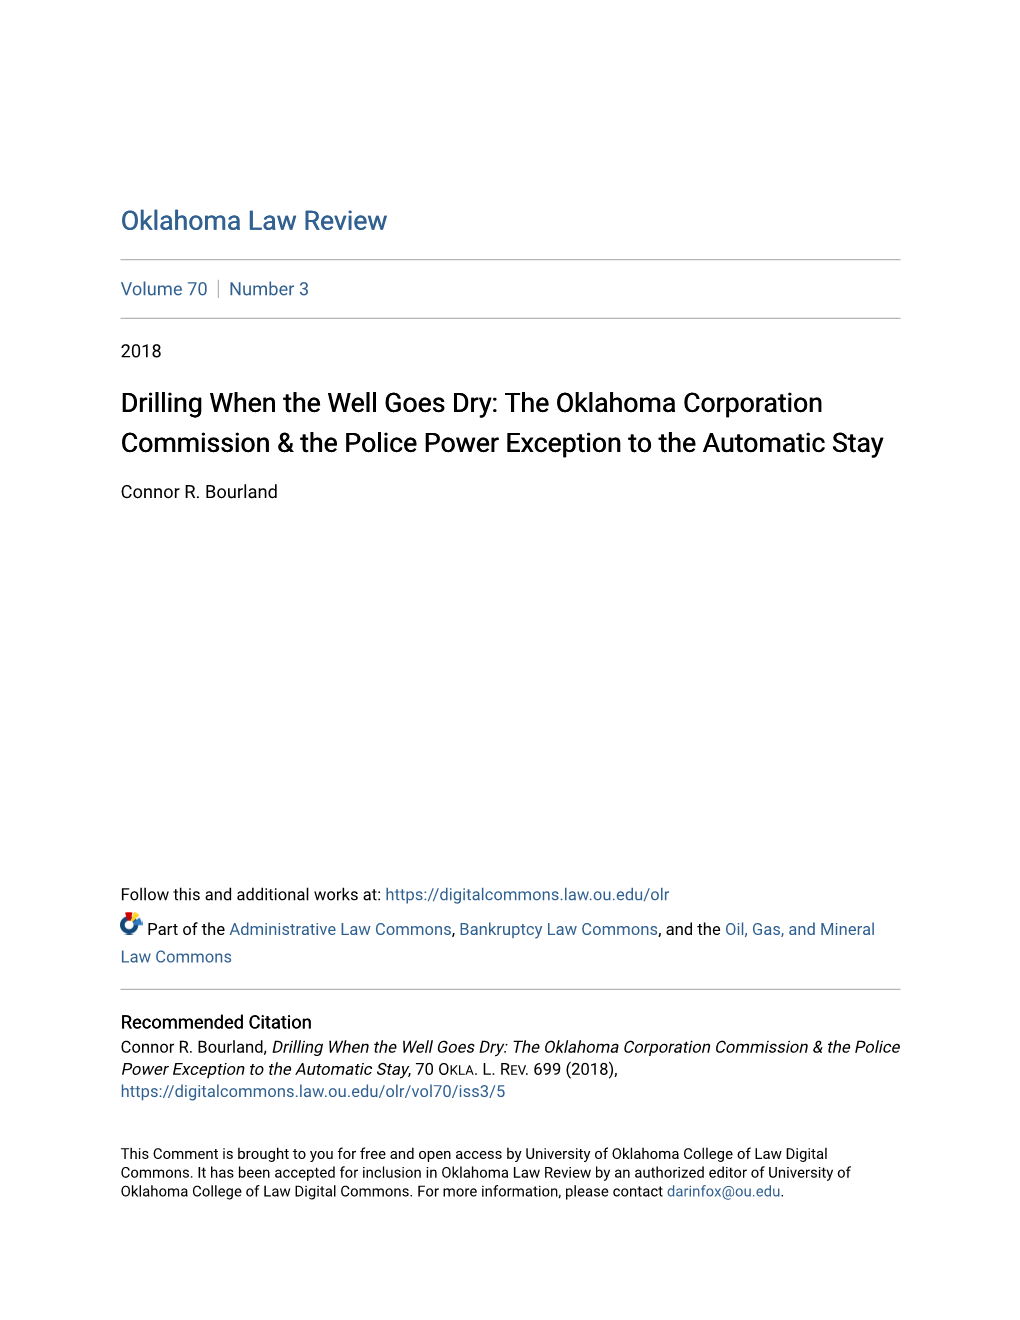 Drilling When the Well Goes Dry: the Oklahoma Corporation Commission & the Police Power Exception to the Automatic Stay